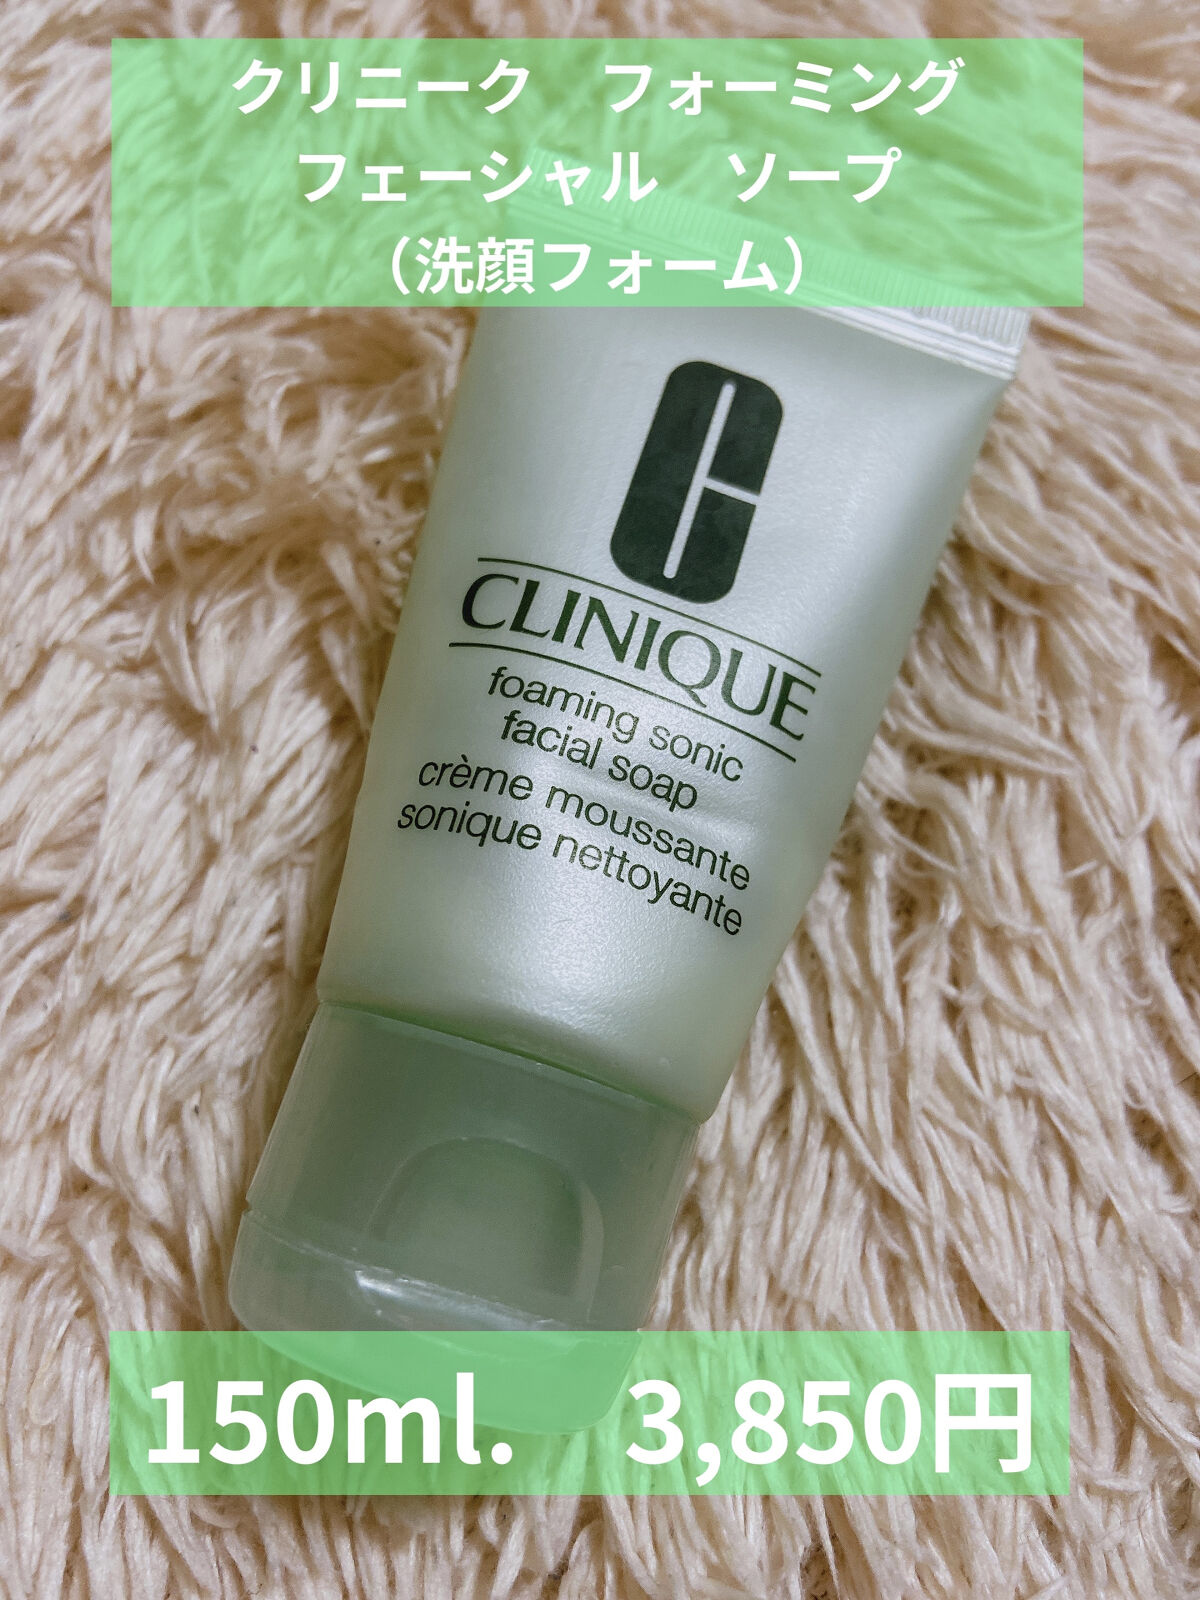 CLINIQUE リキッド フェーシャル ソープ マイルド